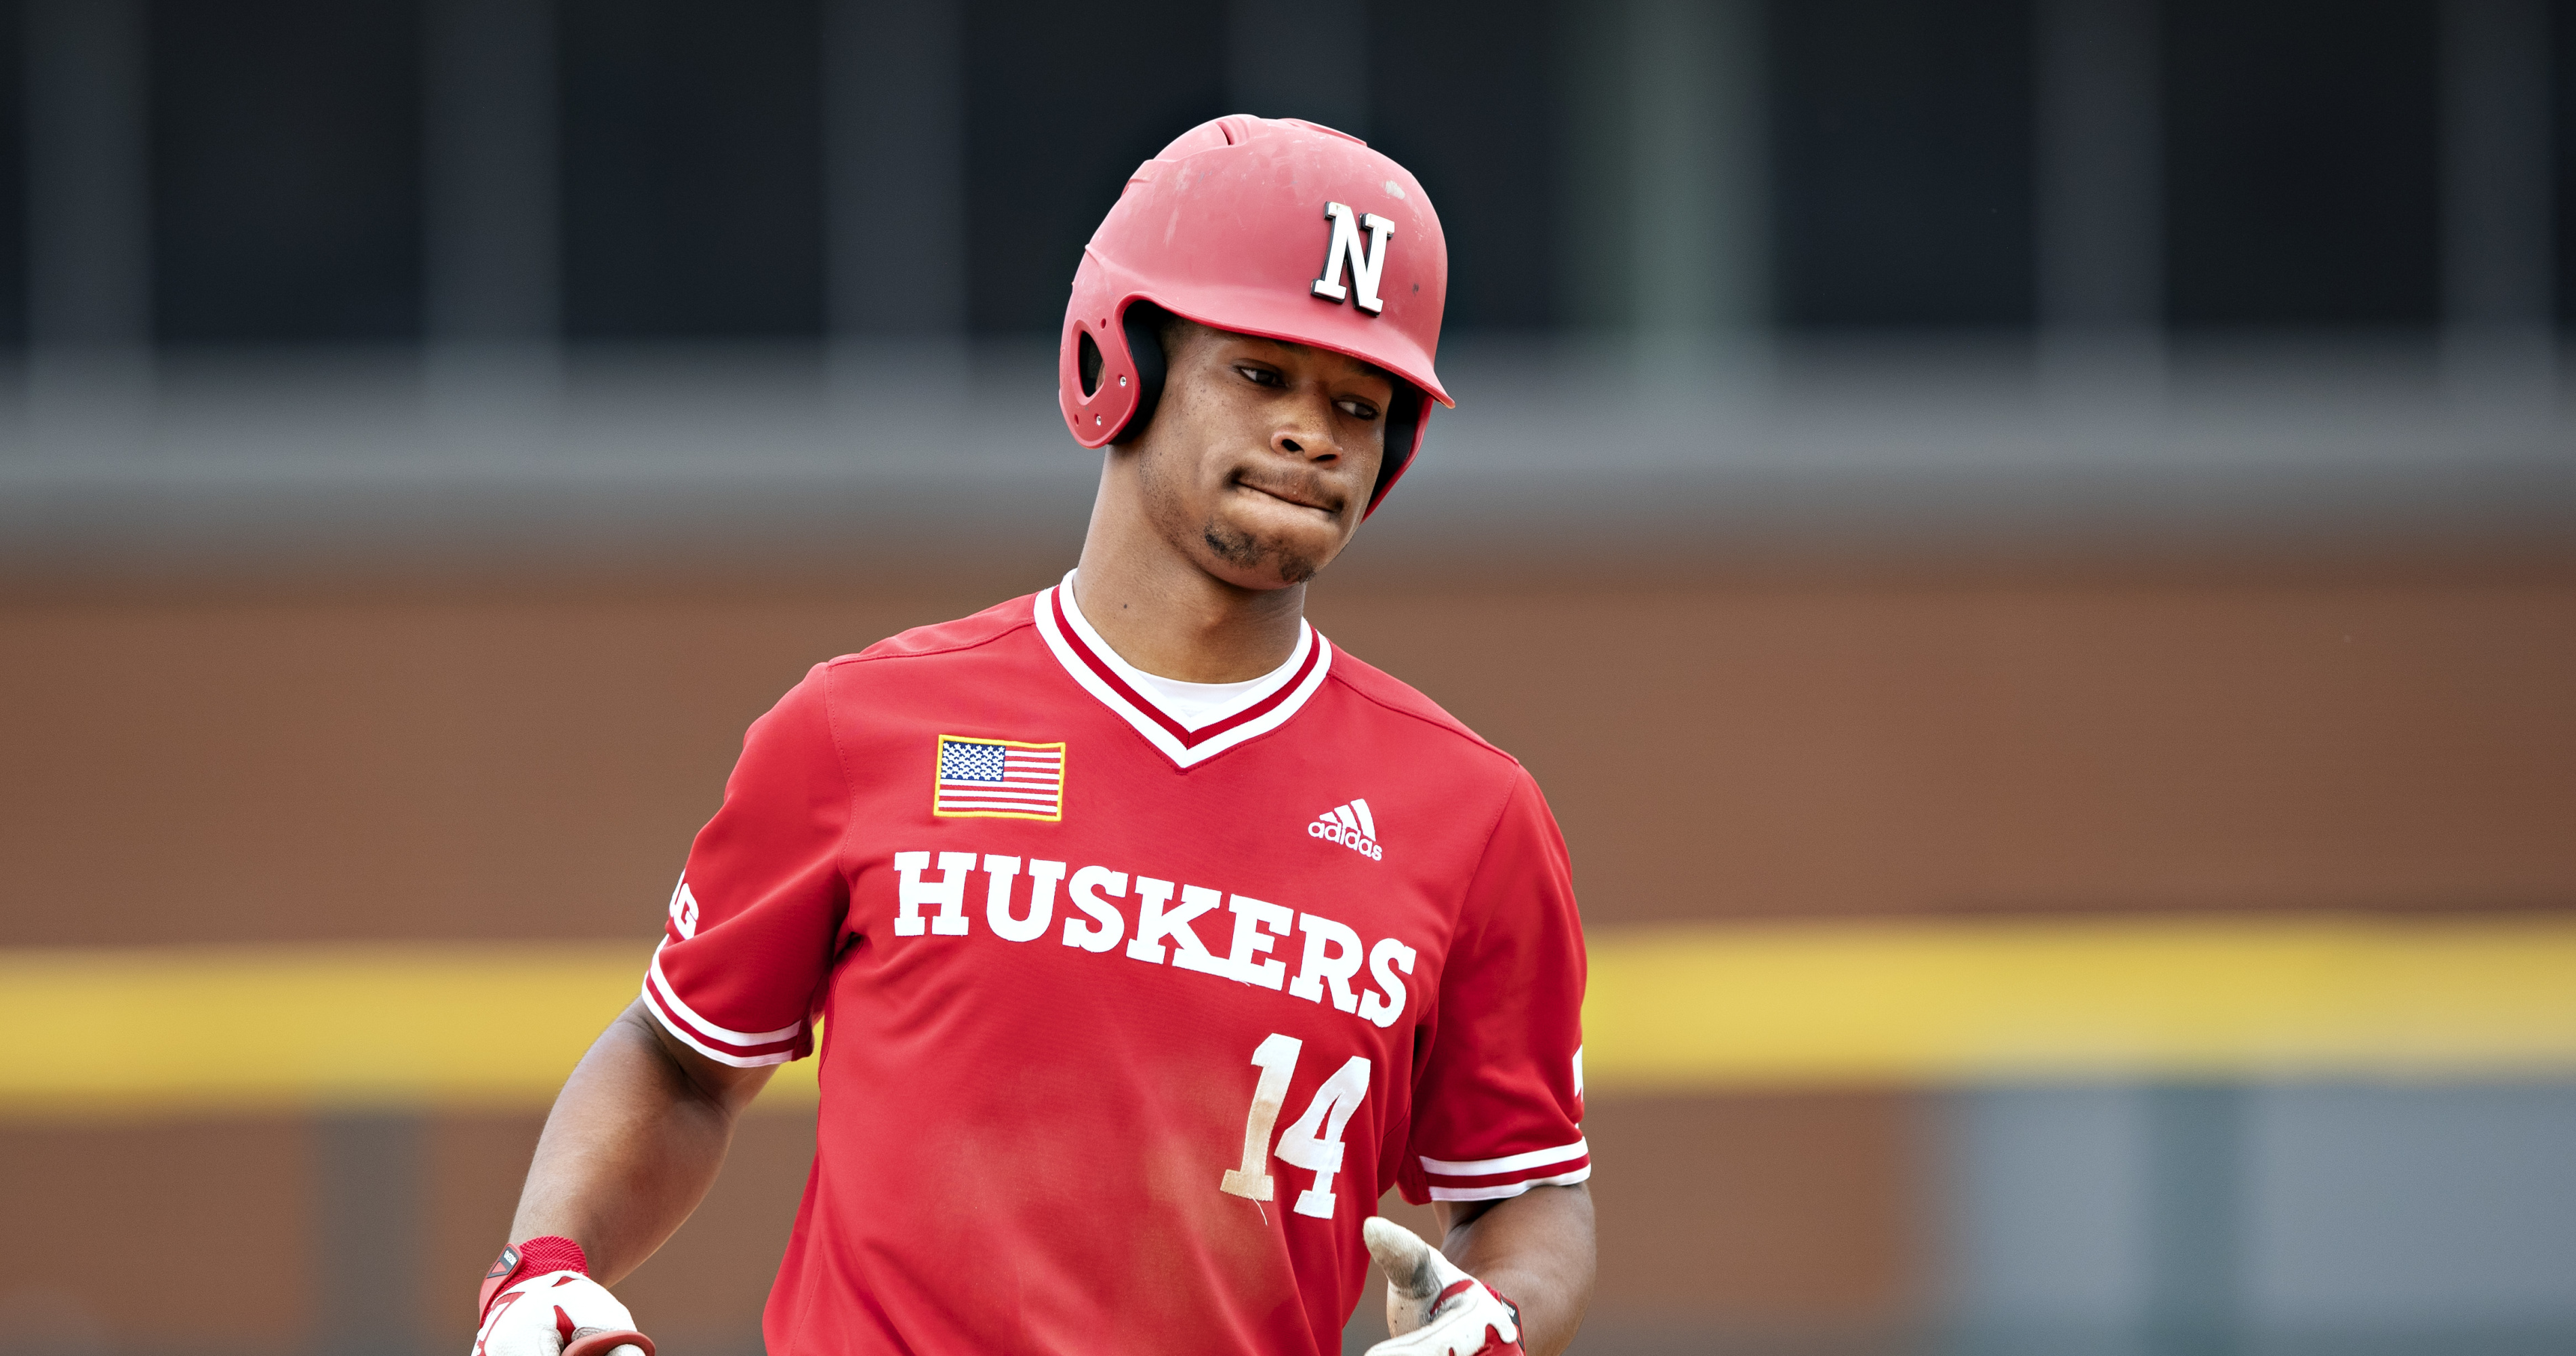 College Baseball Regional 2021 Results, Highlights and Bracket from